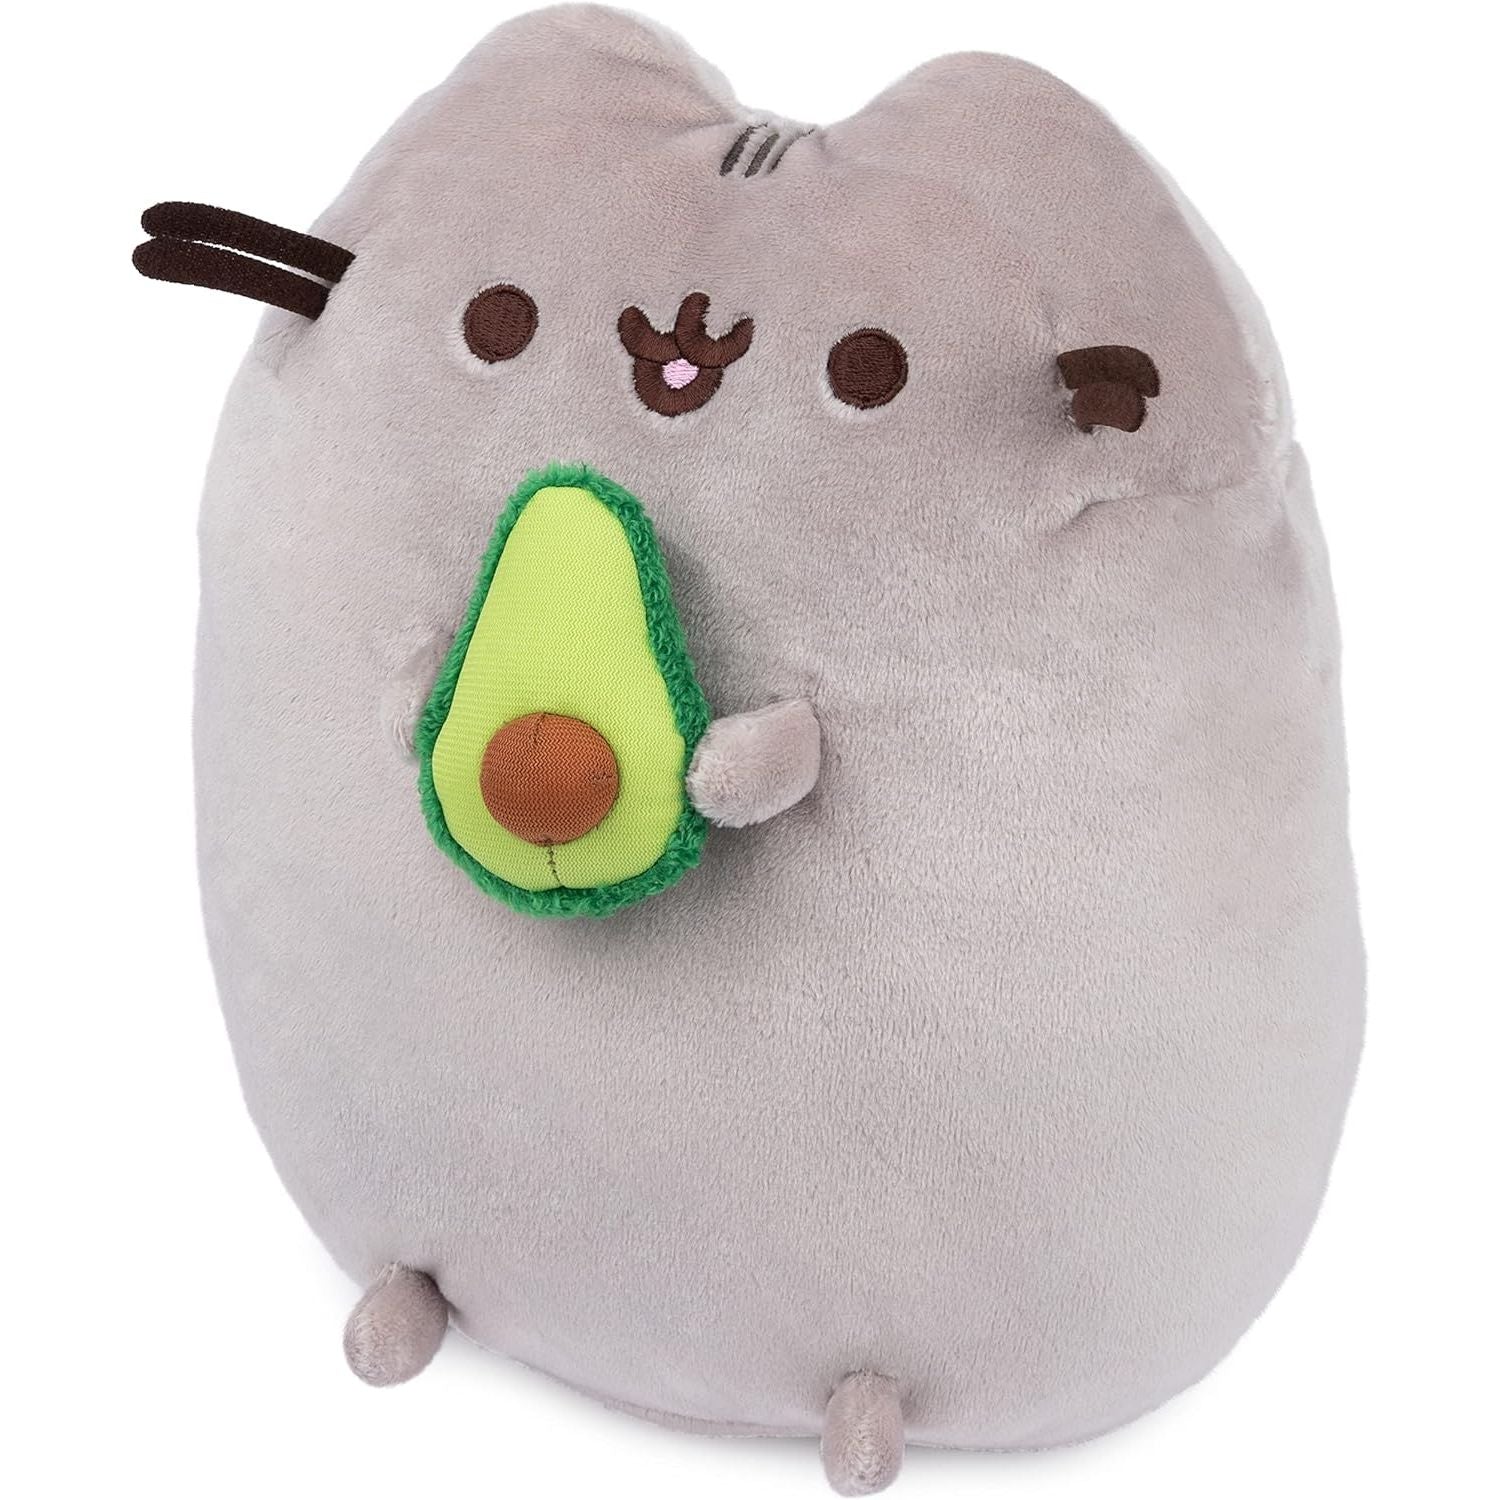 GUND Pusheen Snackable Avocado Plush, Stuffed Animal for Ages 8 and Up, 9.5”, Gray